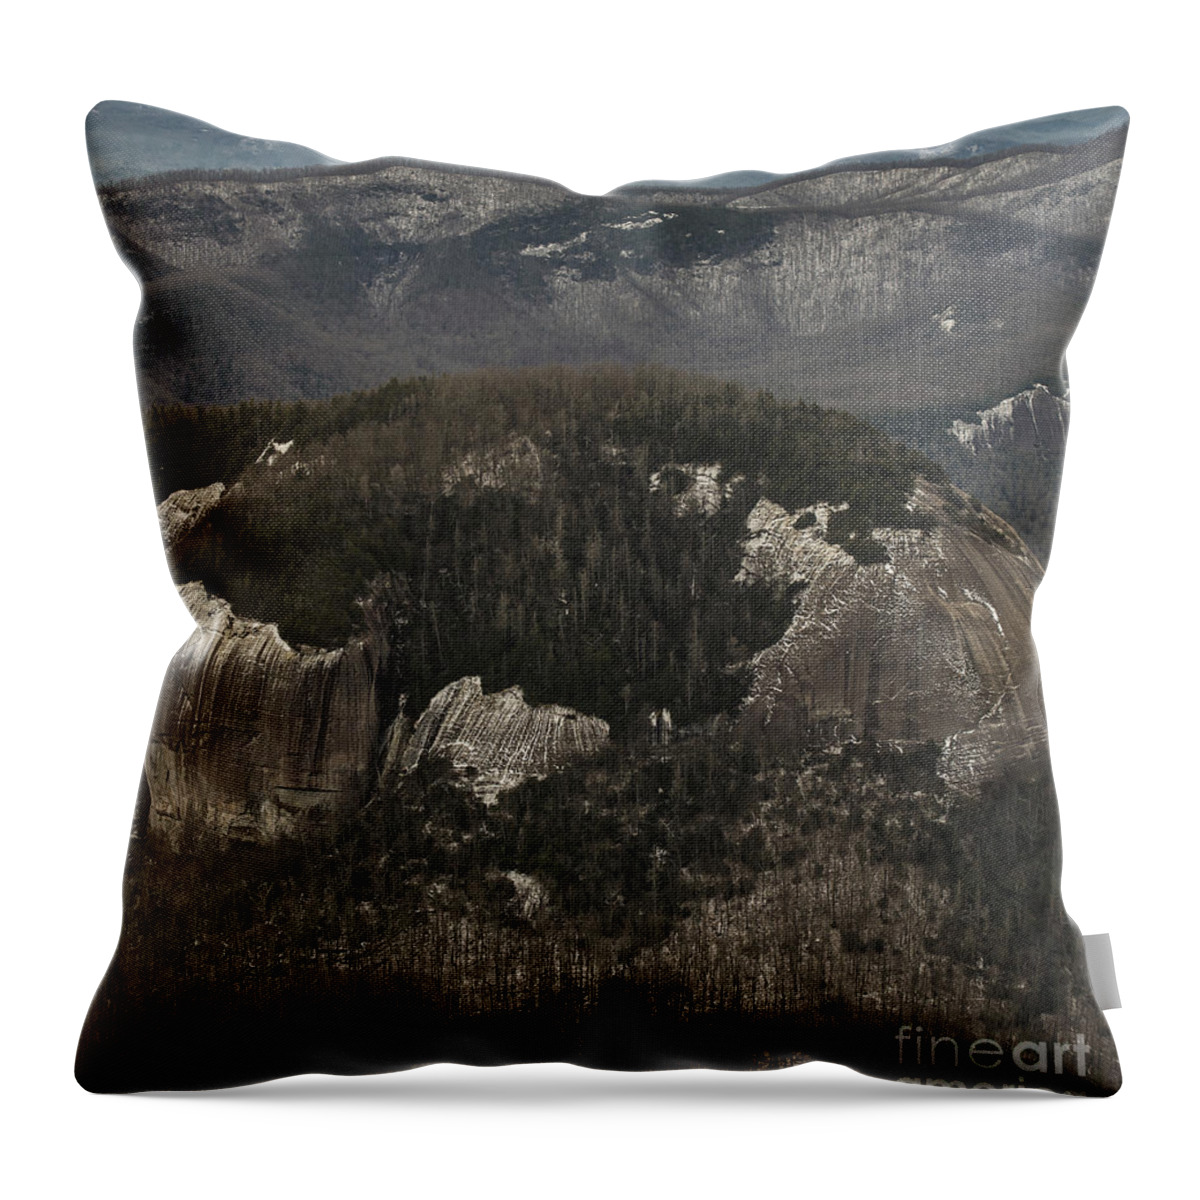 North Carolina Throw Pillow featuring the photograph Looking Glass Rock by Blue Ridge Parkway - Aerial Photo #4 by David Oppenheimer